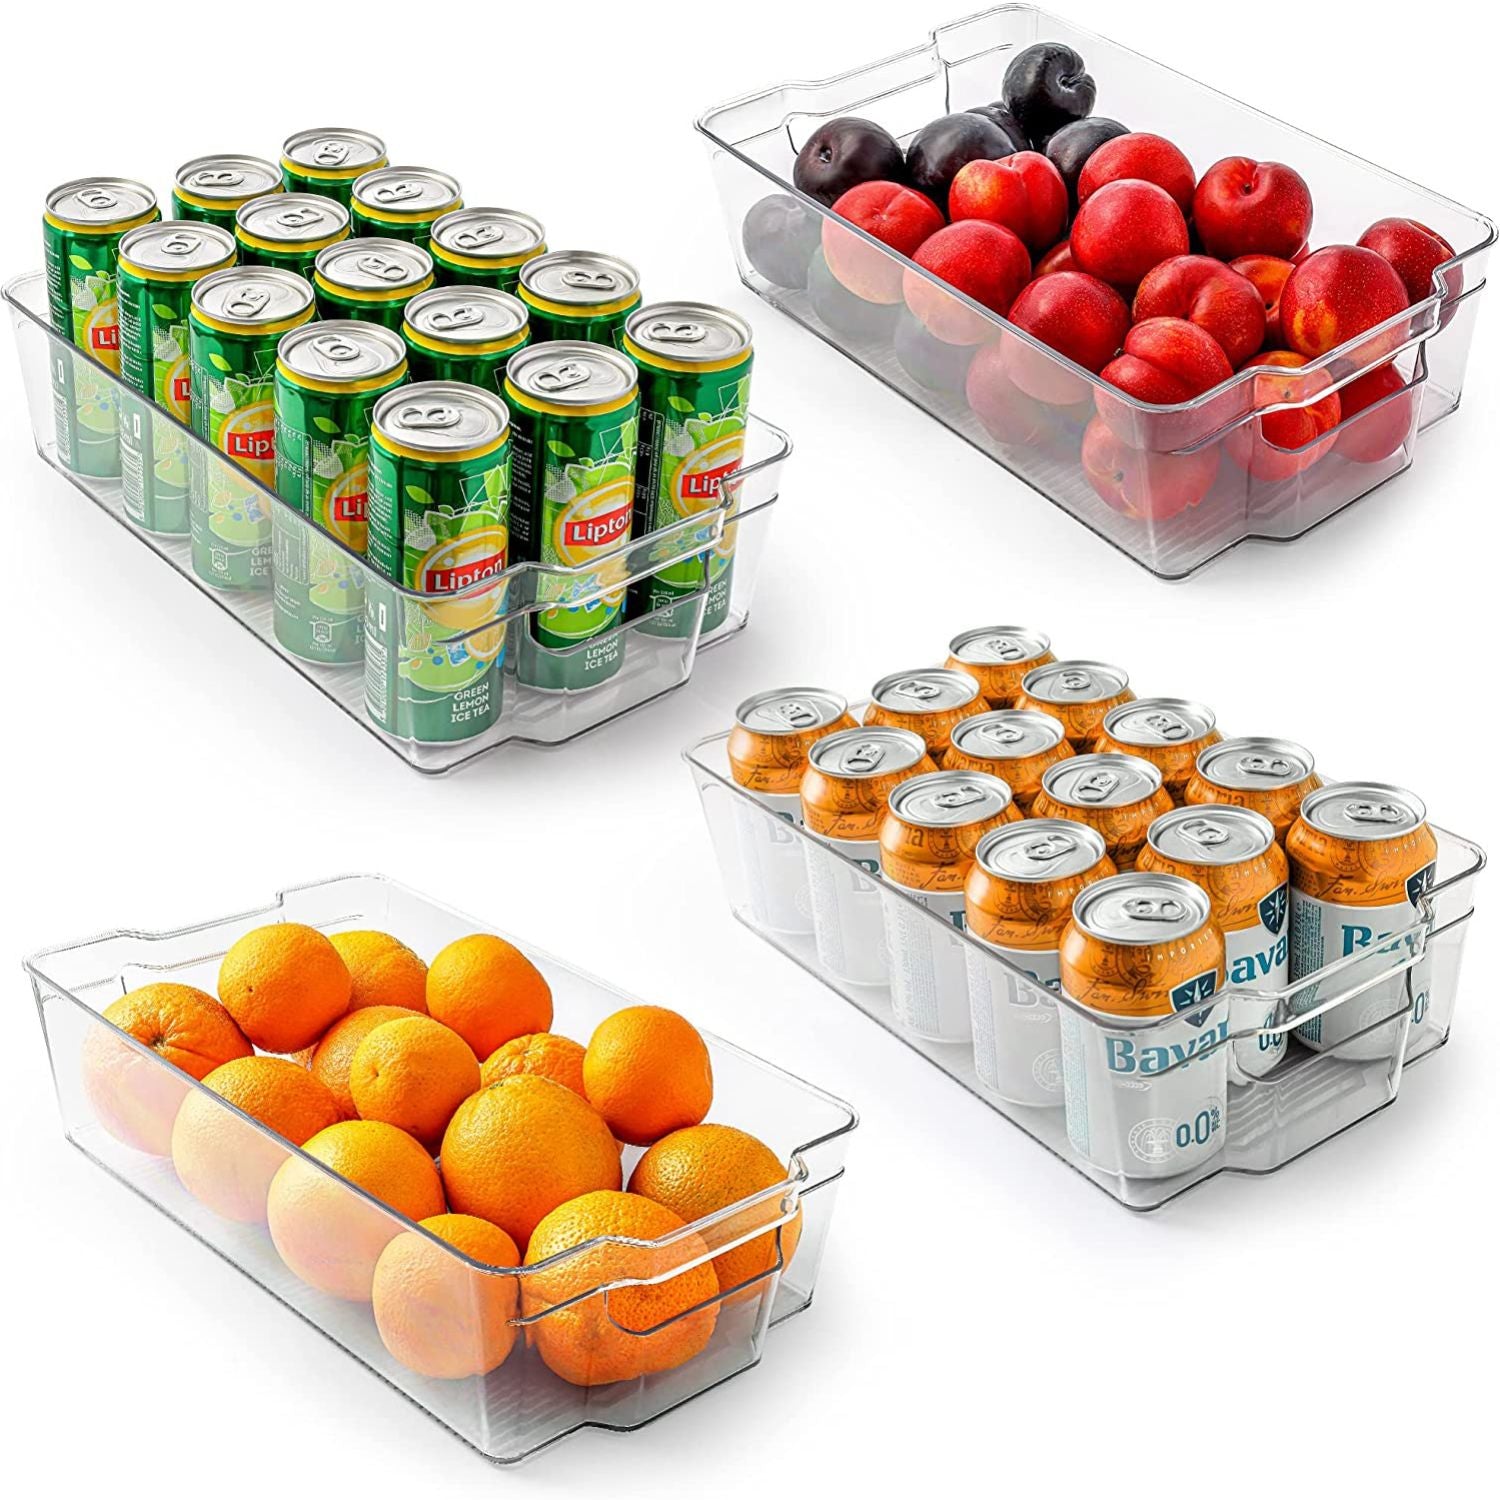 Clear Refrigerator Organizer Bins - 4pc - Easy To Access, Stackable Fridge Bins in Multiple Sizes